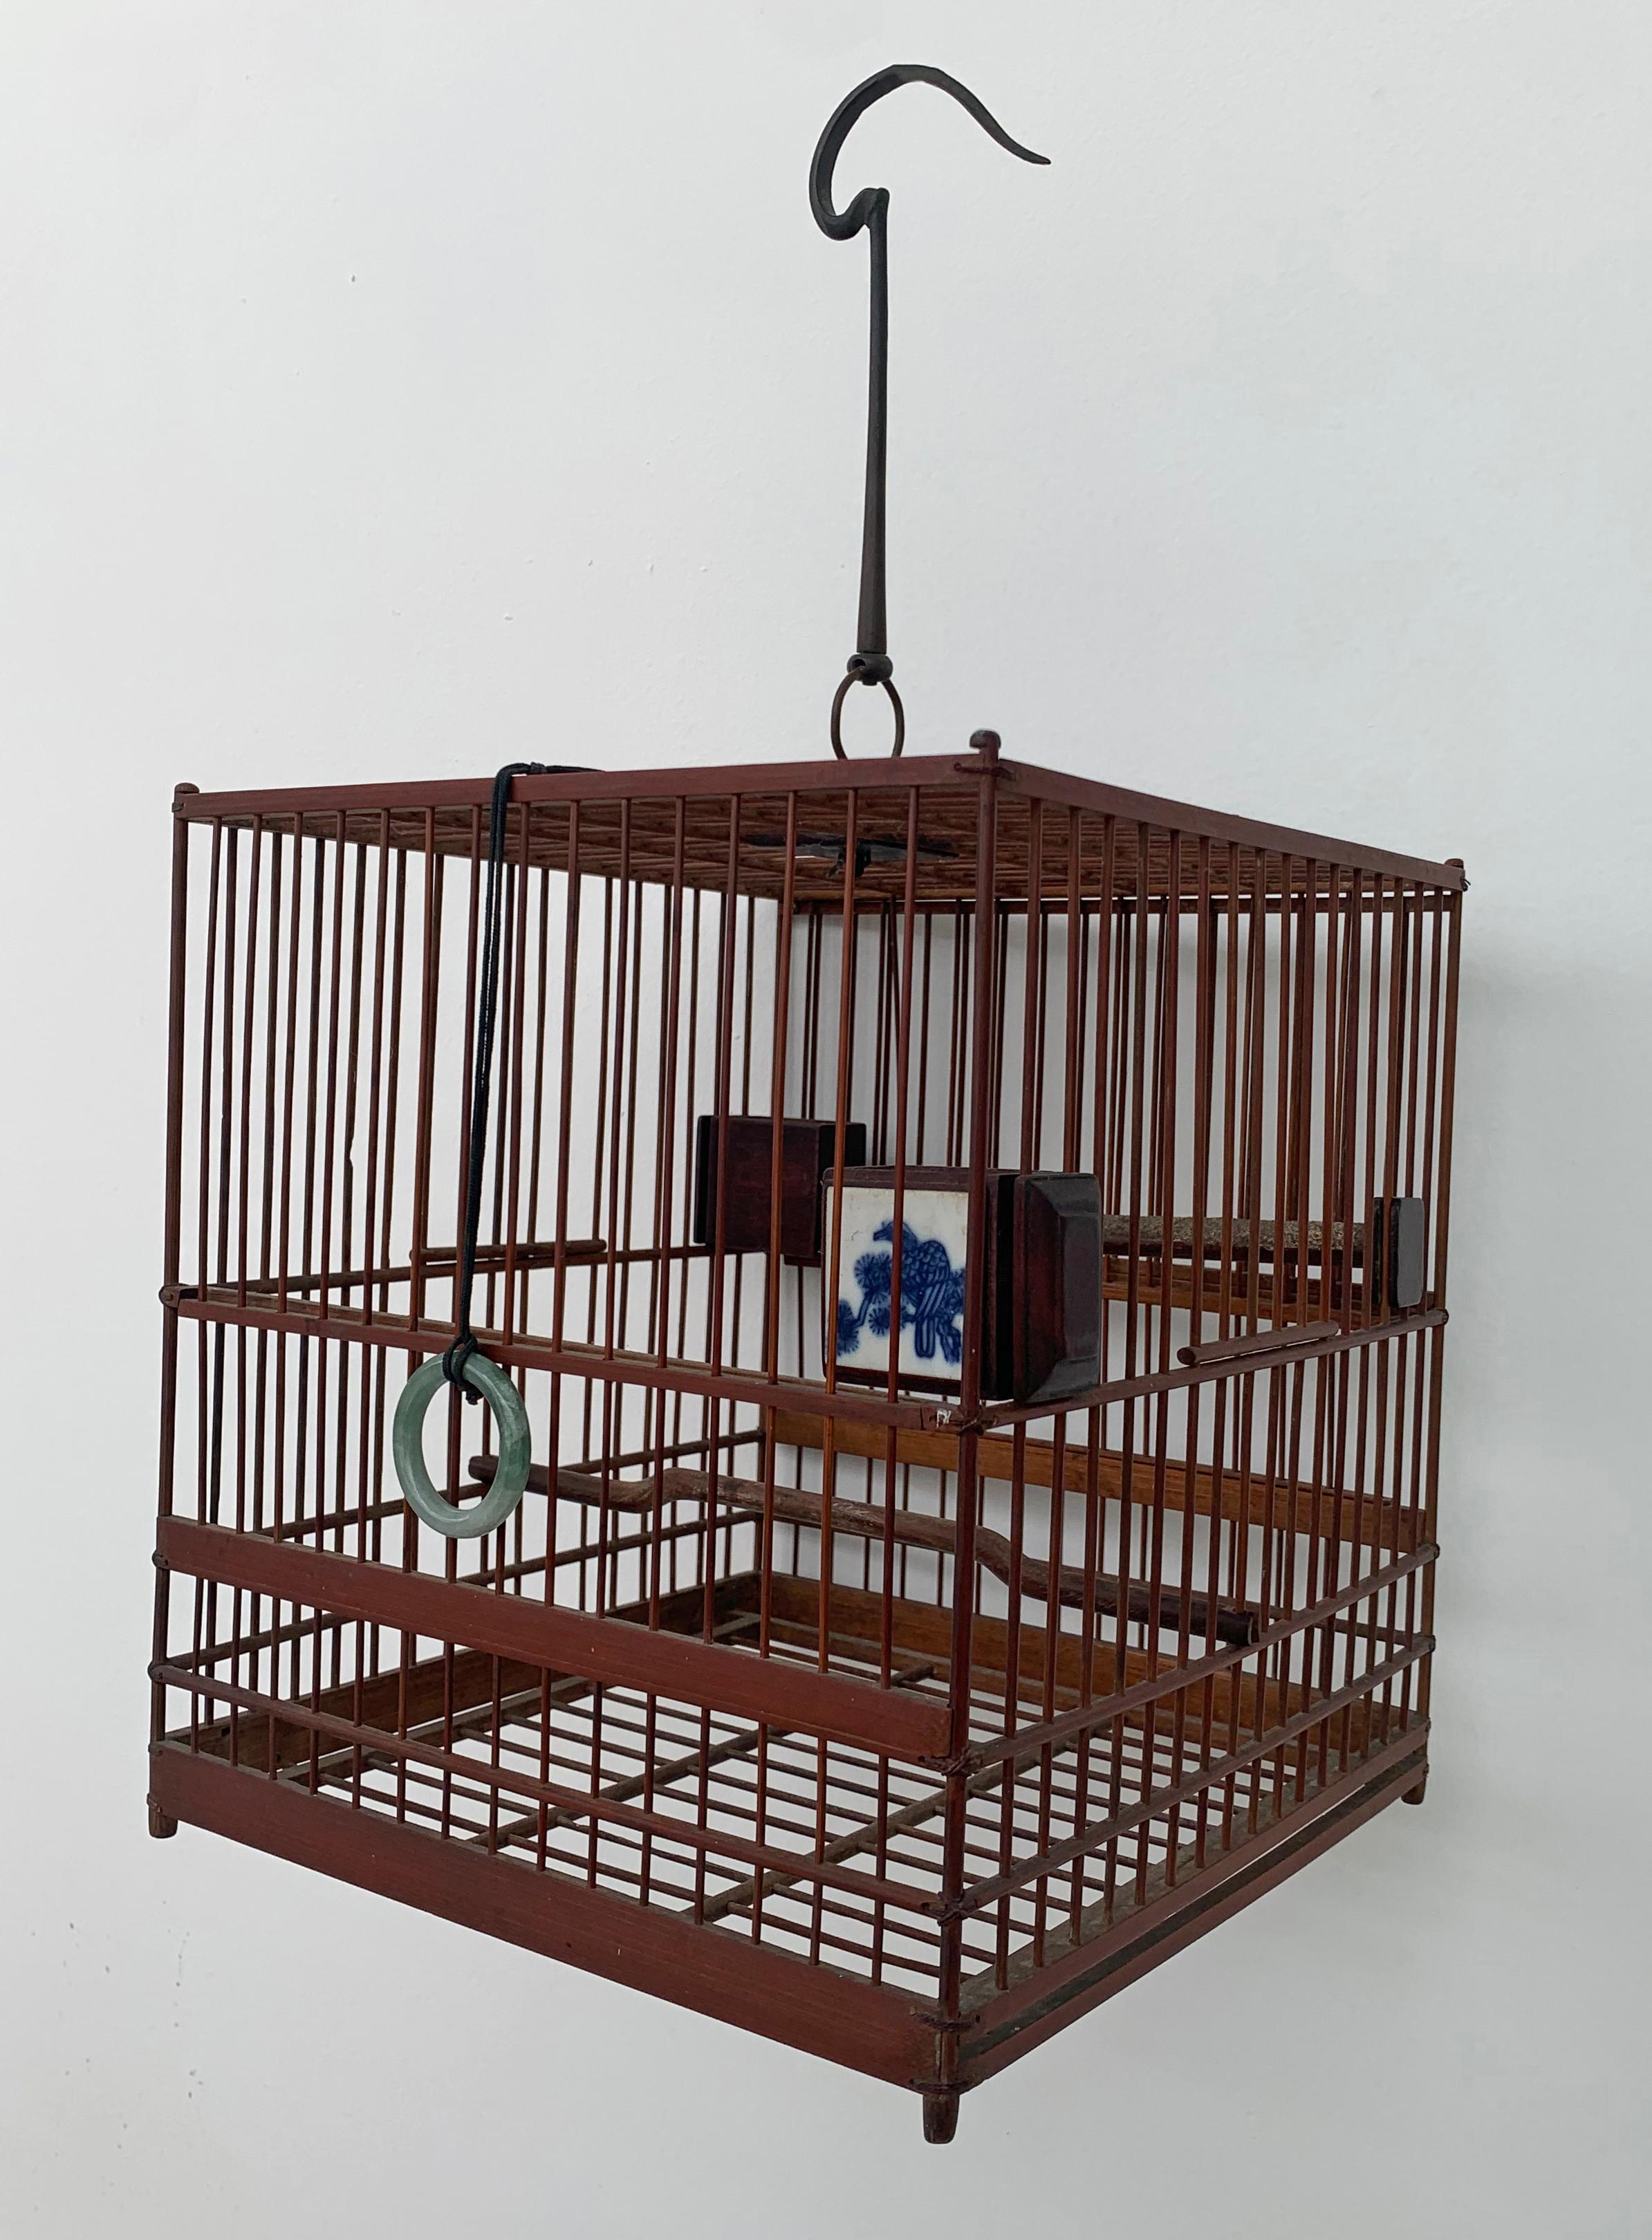 Ceramic Chinese Birdcage with Porcelain Feeding Bowls, Vintage Mid-20th Century For Sale